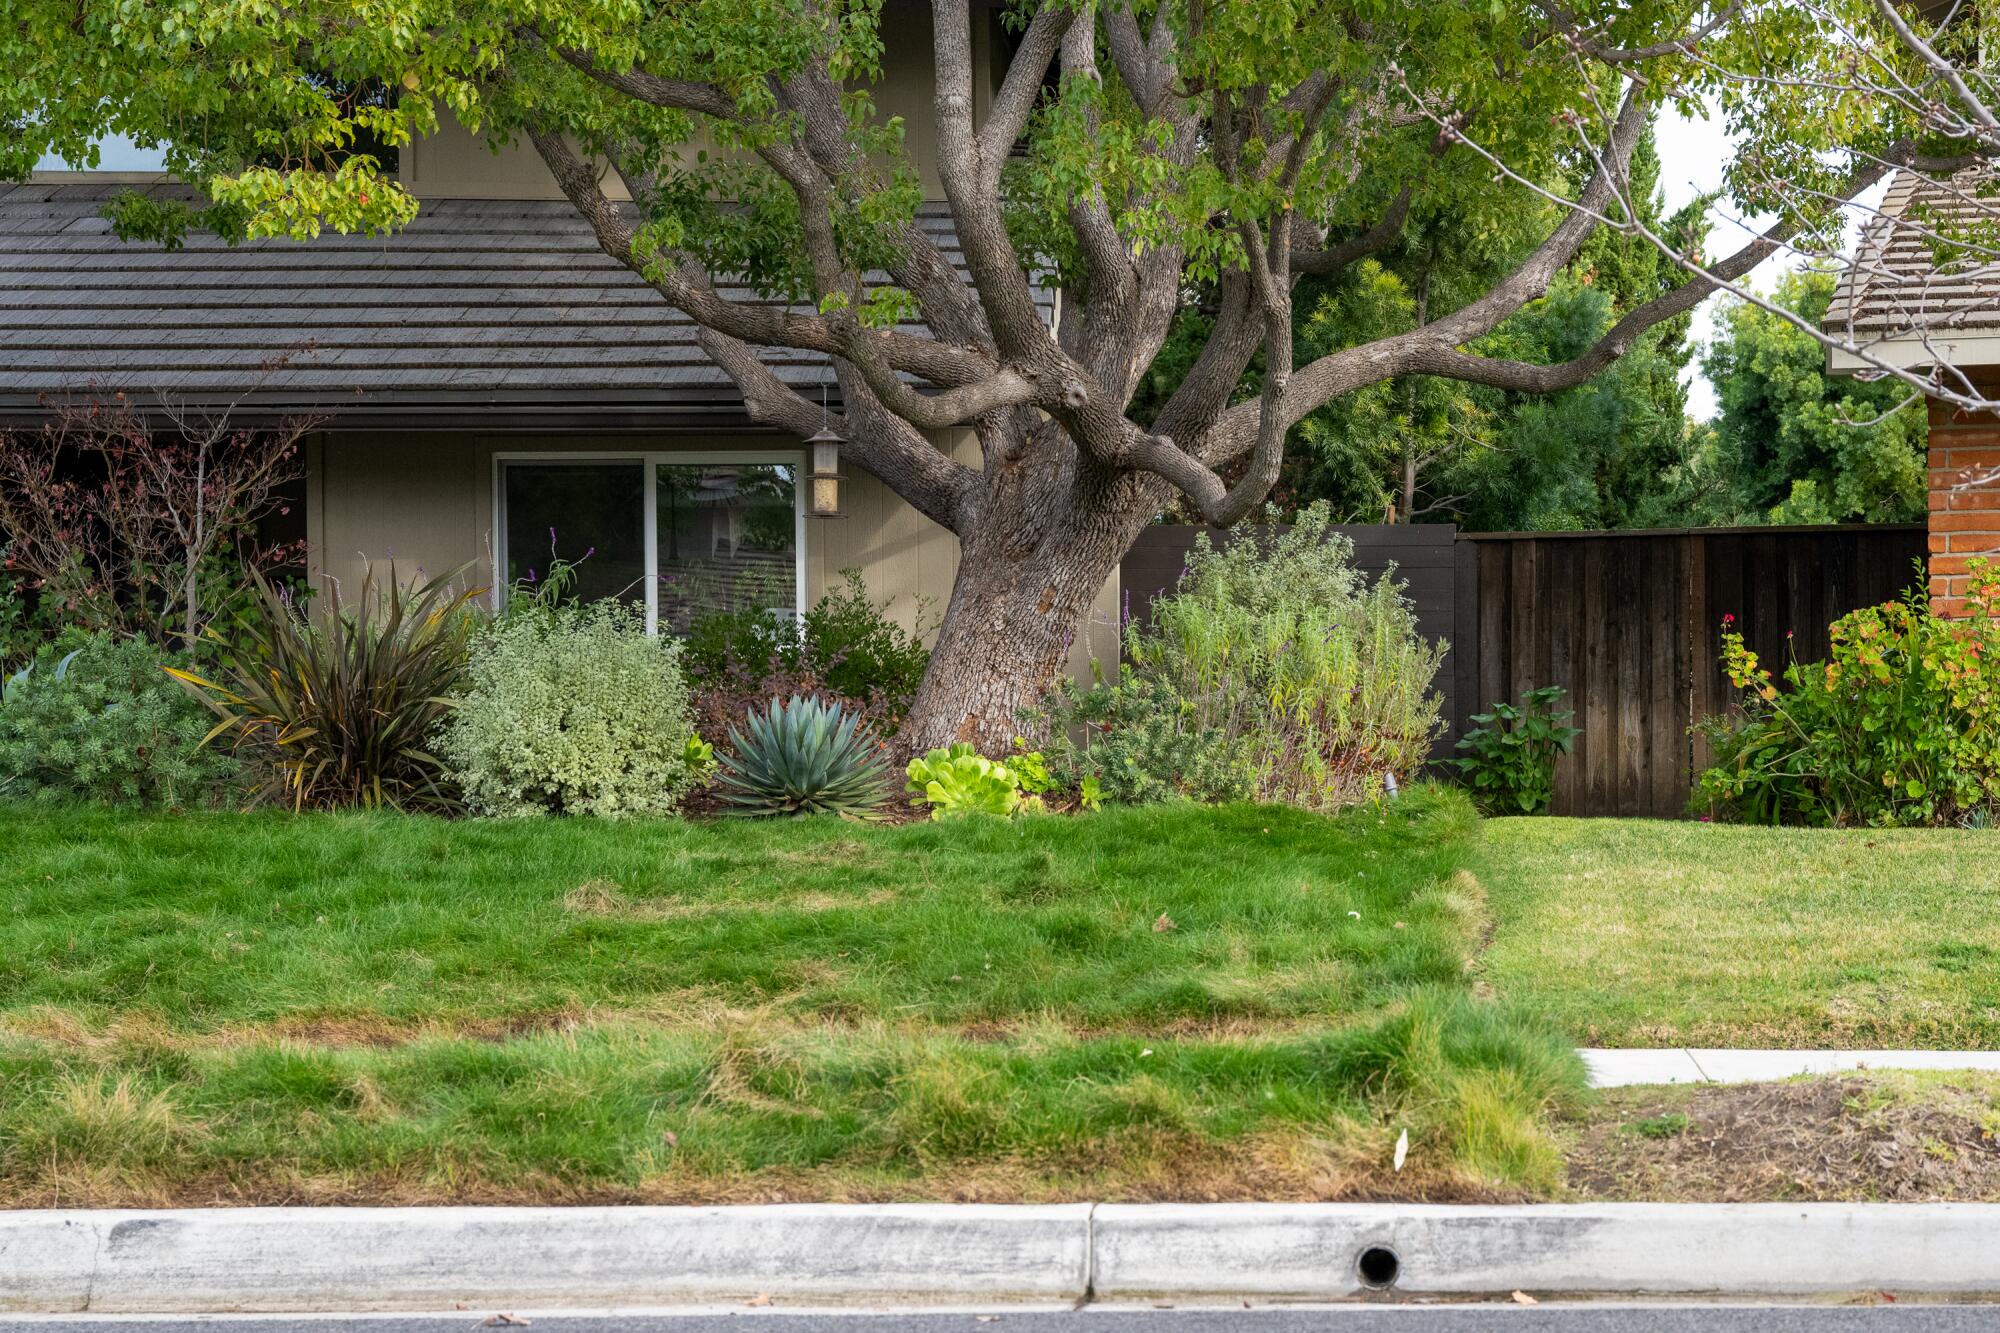 A front yard, with native grass in one yard and common lawn grass in another.